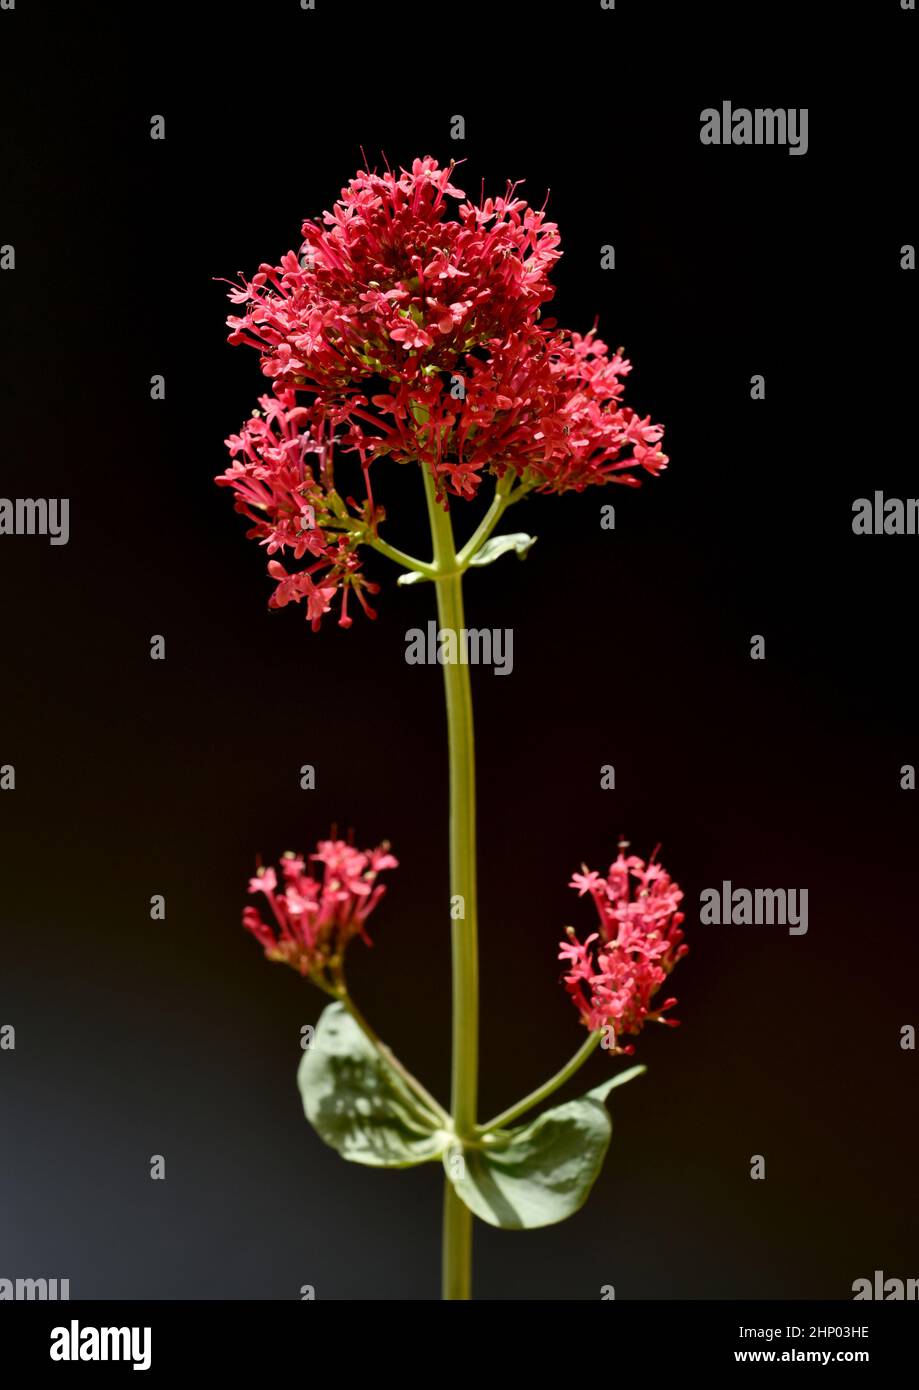 Spornflower, Centranthus ruber is an attractive and insect-loving flower. Stock Photo